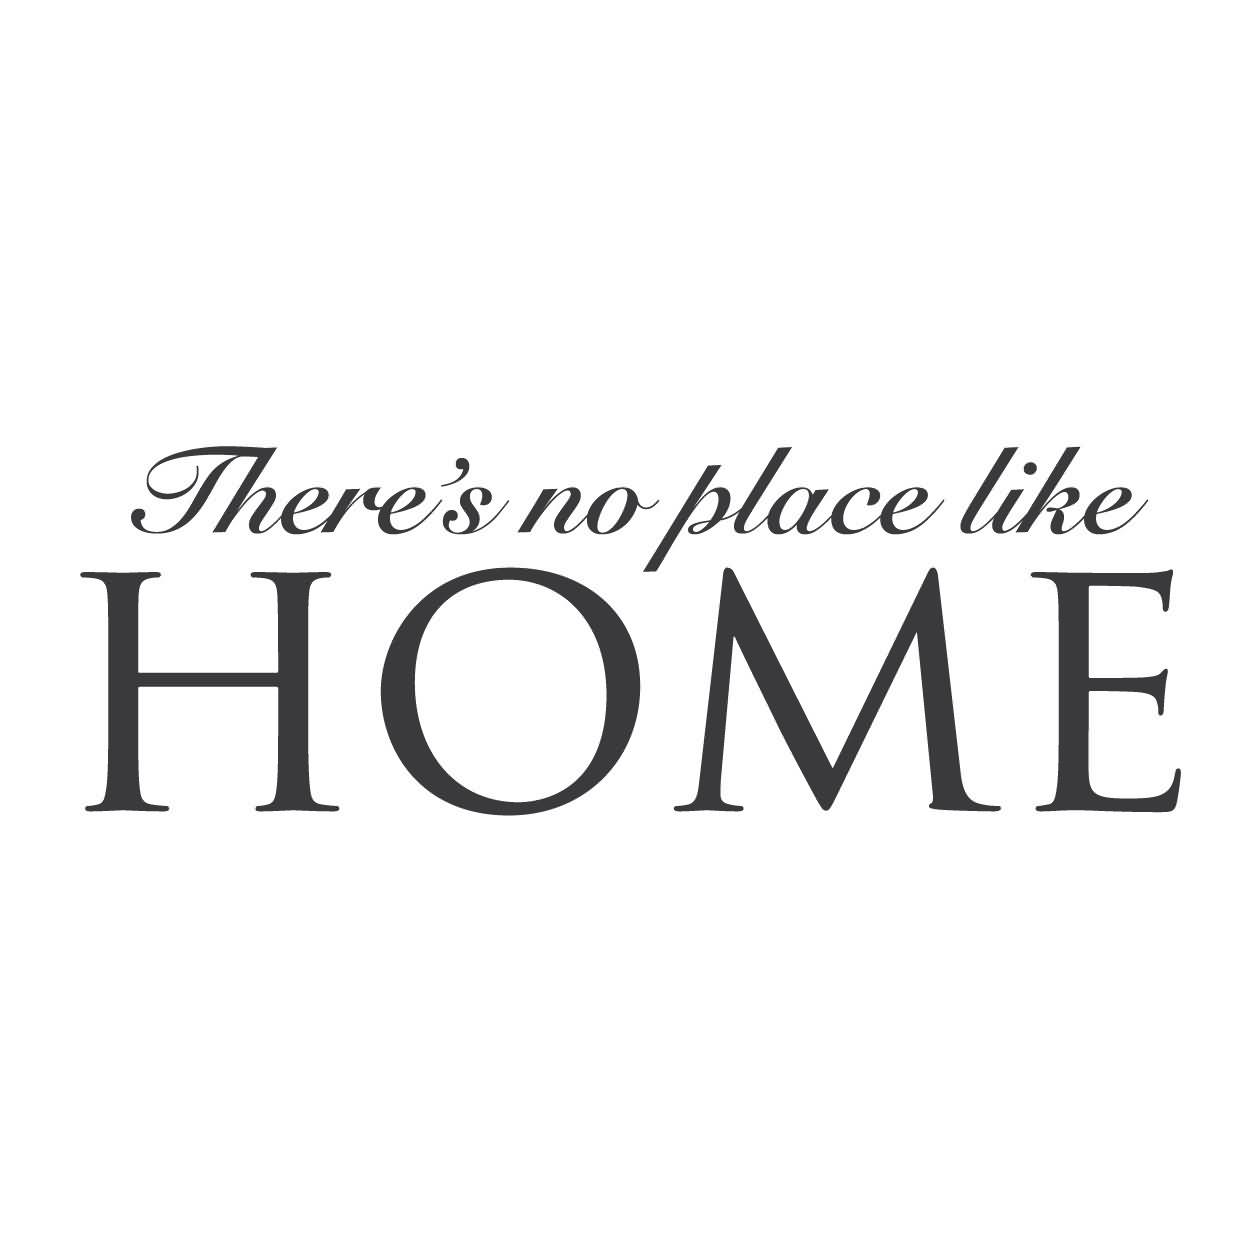 There's No Place Like Home.